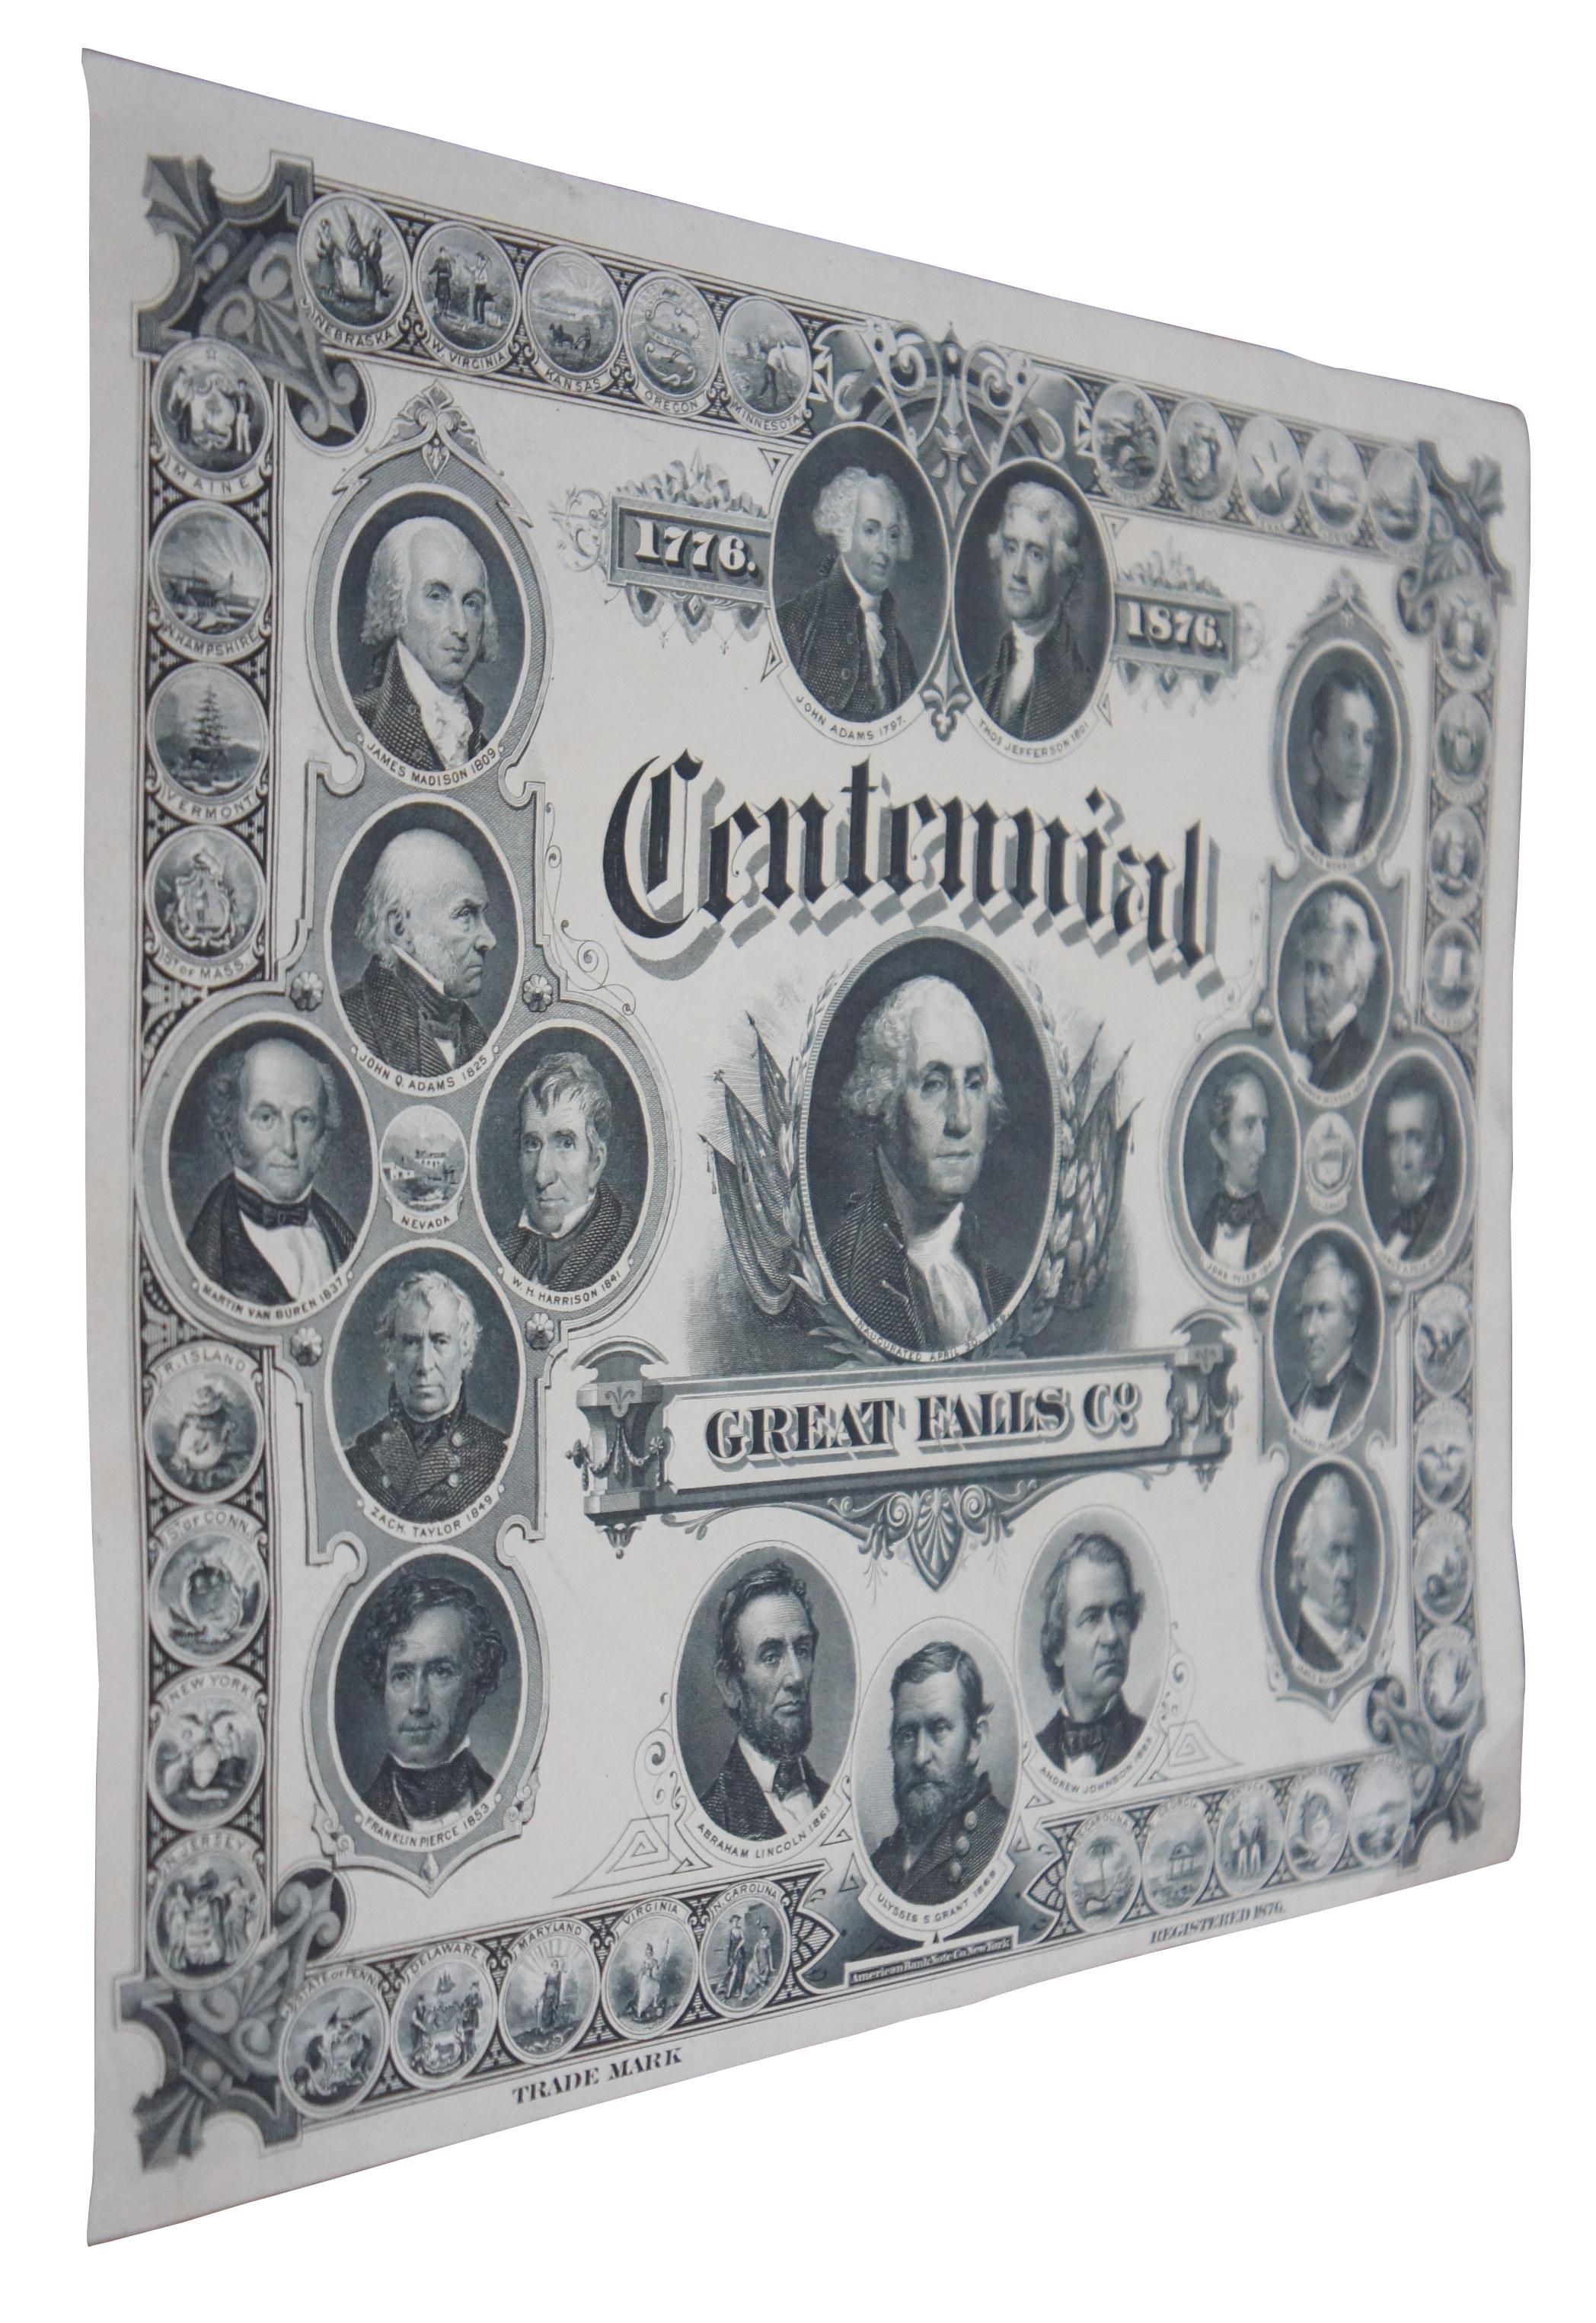 American Classical 1876 Antique American Centennial Bank Note Engraving 18 Presidents 36 States